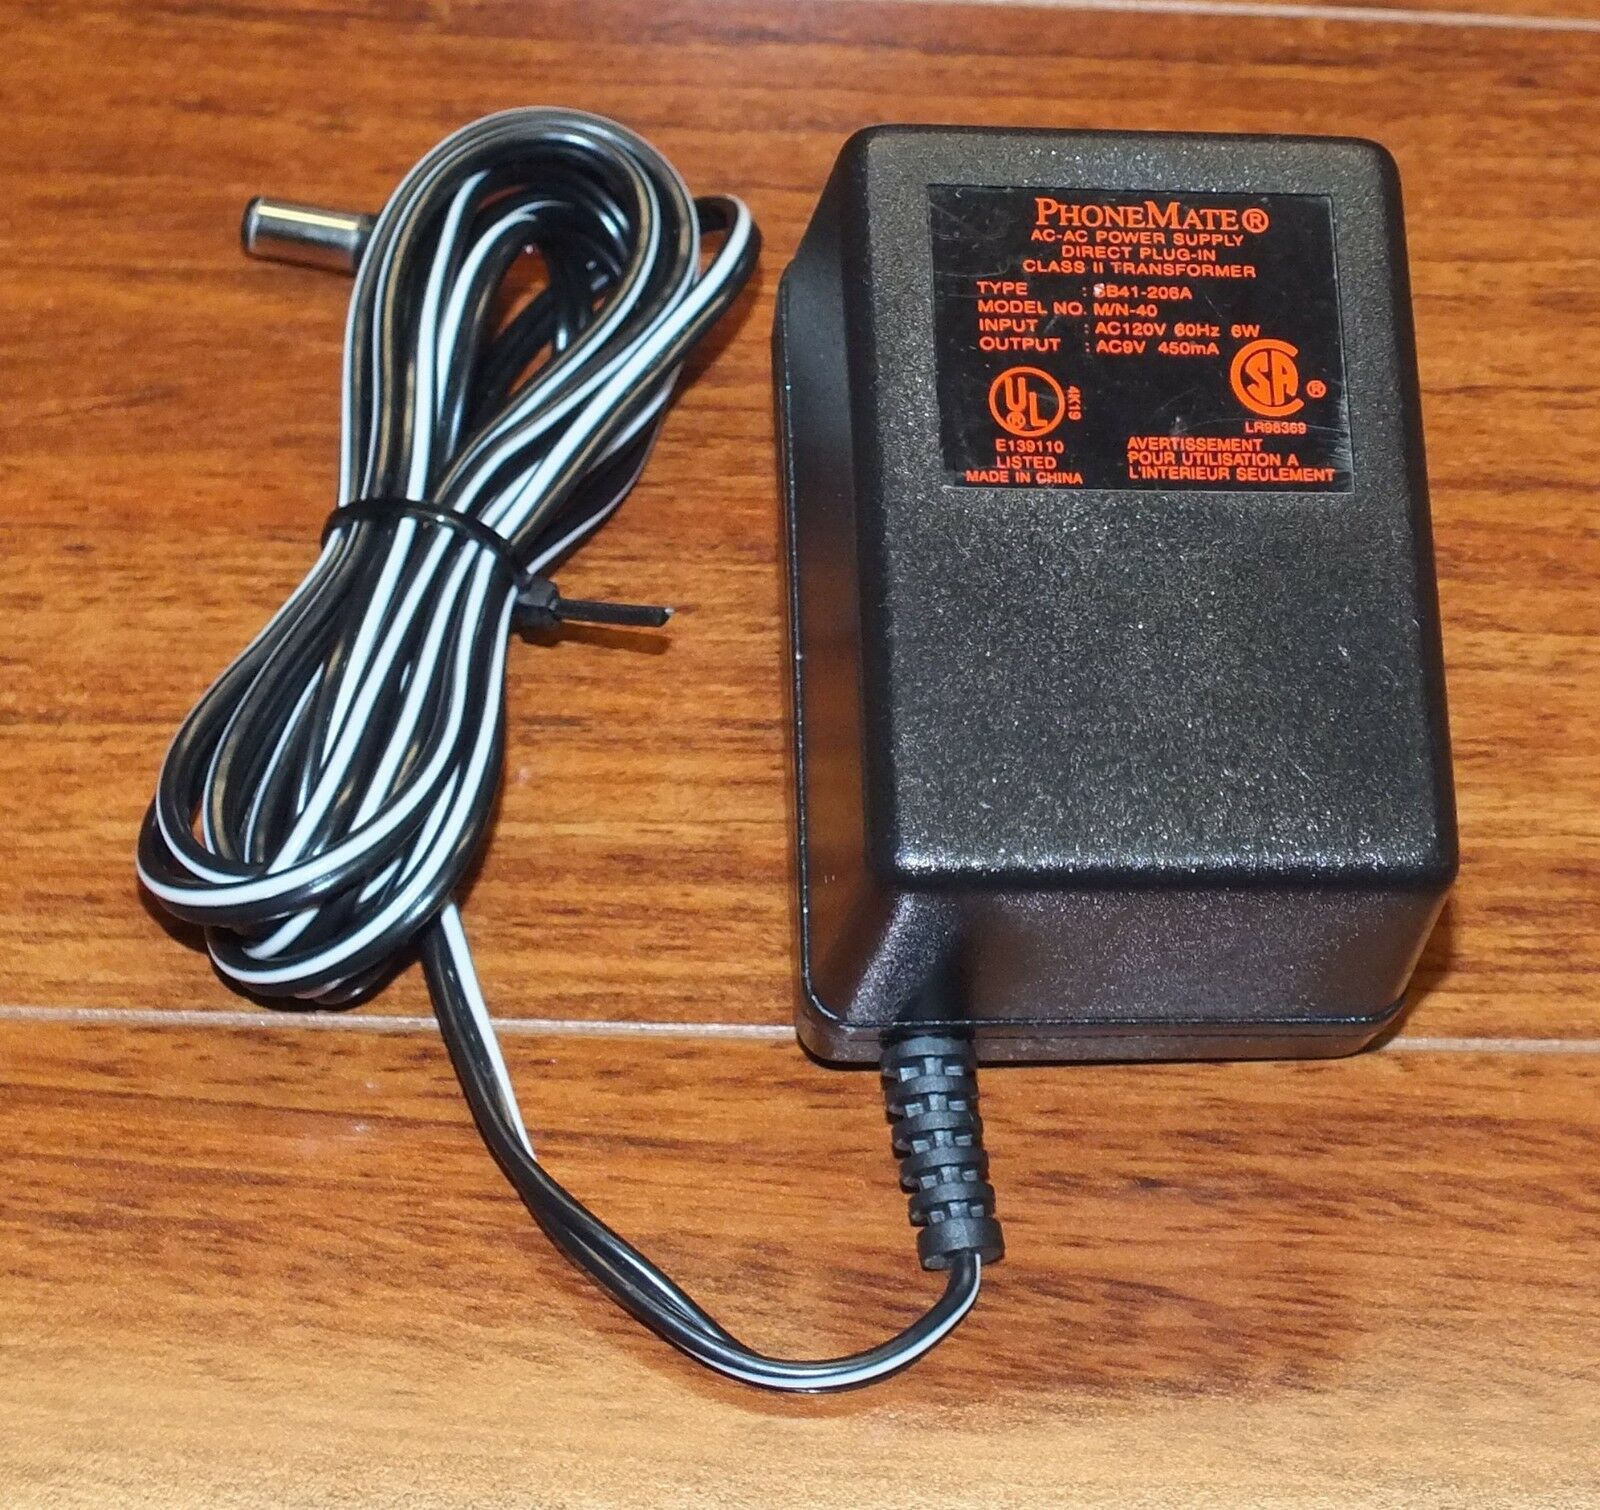 PhoneMate (M/N-40) 9V 450mA 6W 60Hz AC-AC Power Supply Charger (SB41-206A) Country/Region of Manufacture: China MPN: